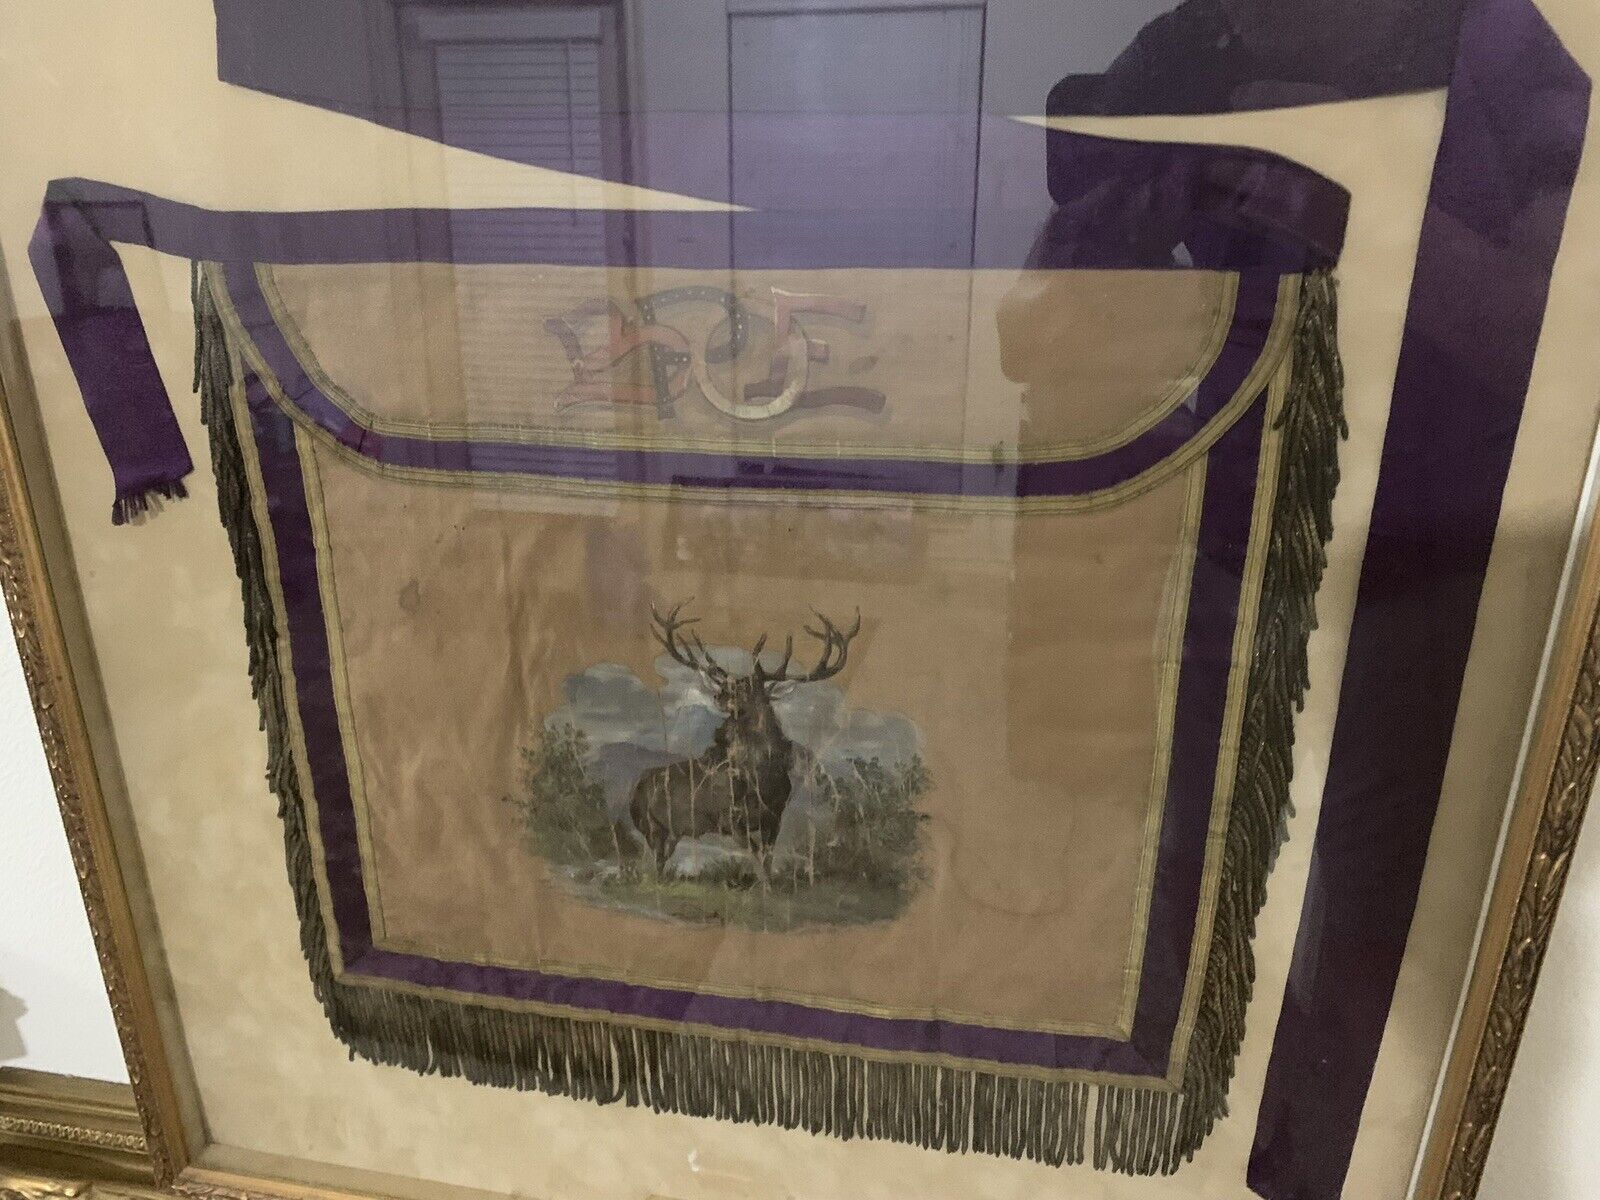 Elks 1876 Grand Lodge Officers ritual apron w/ Frame. Make Me A Offer